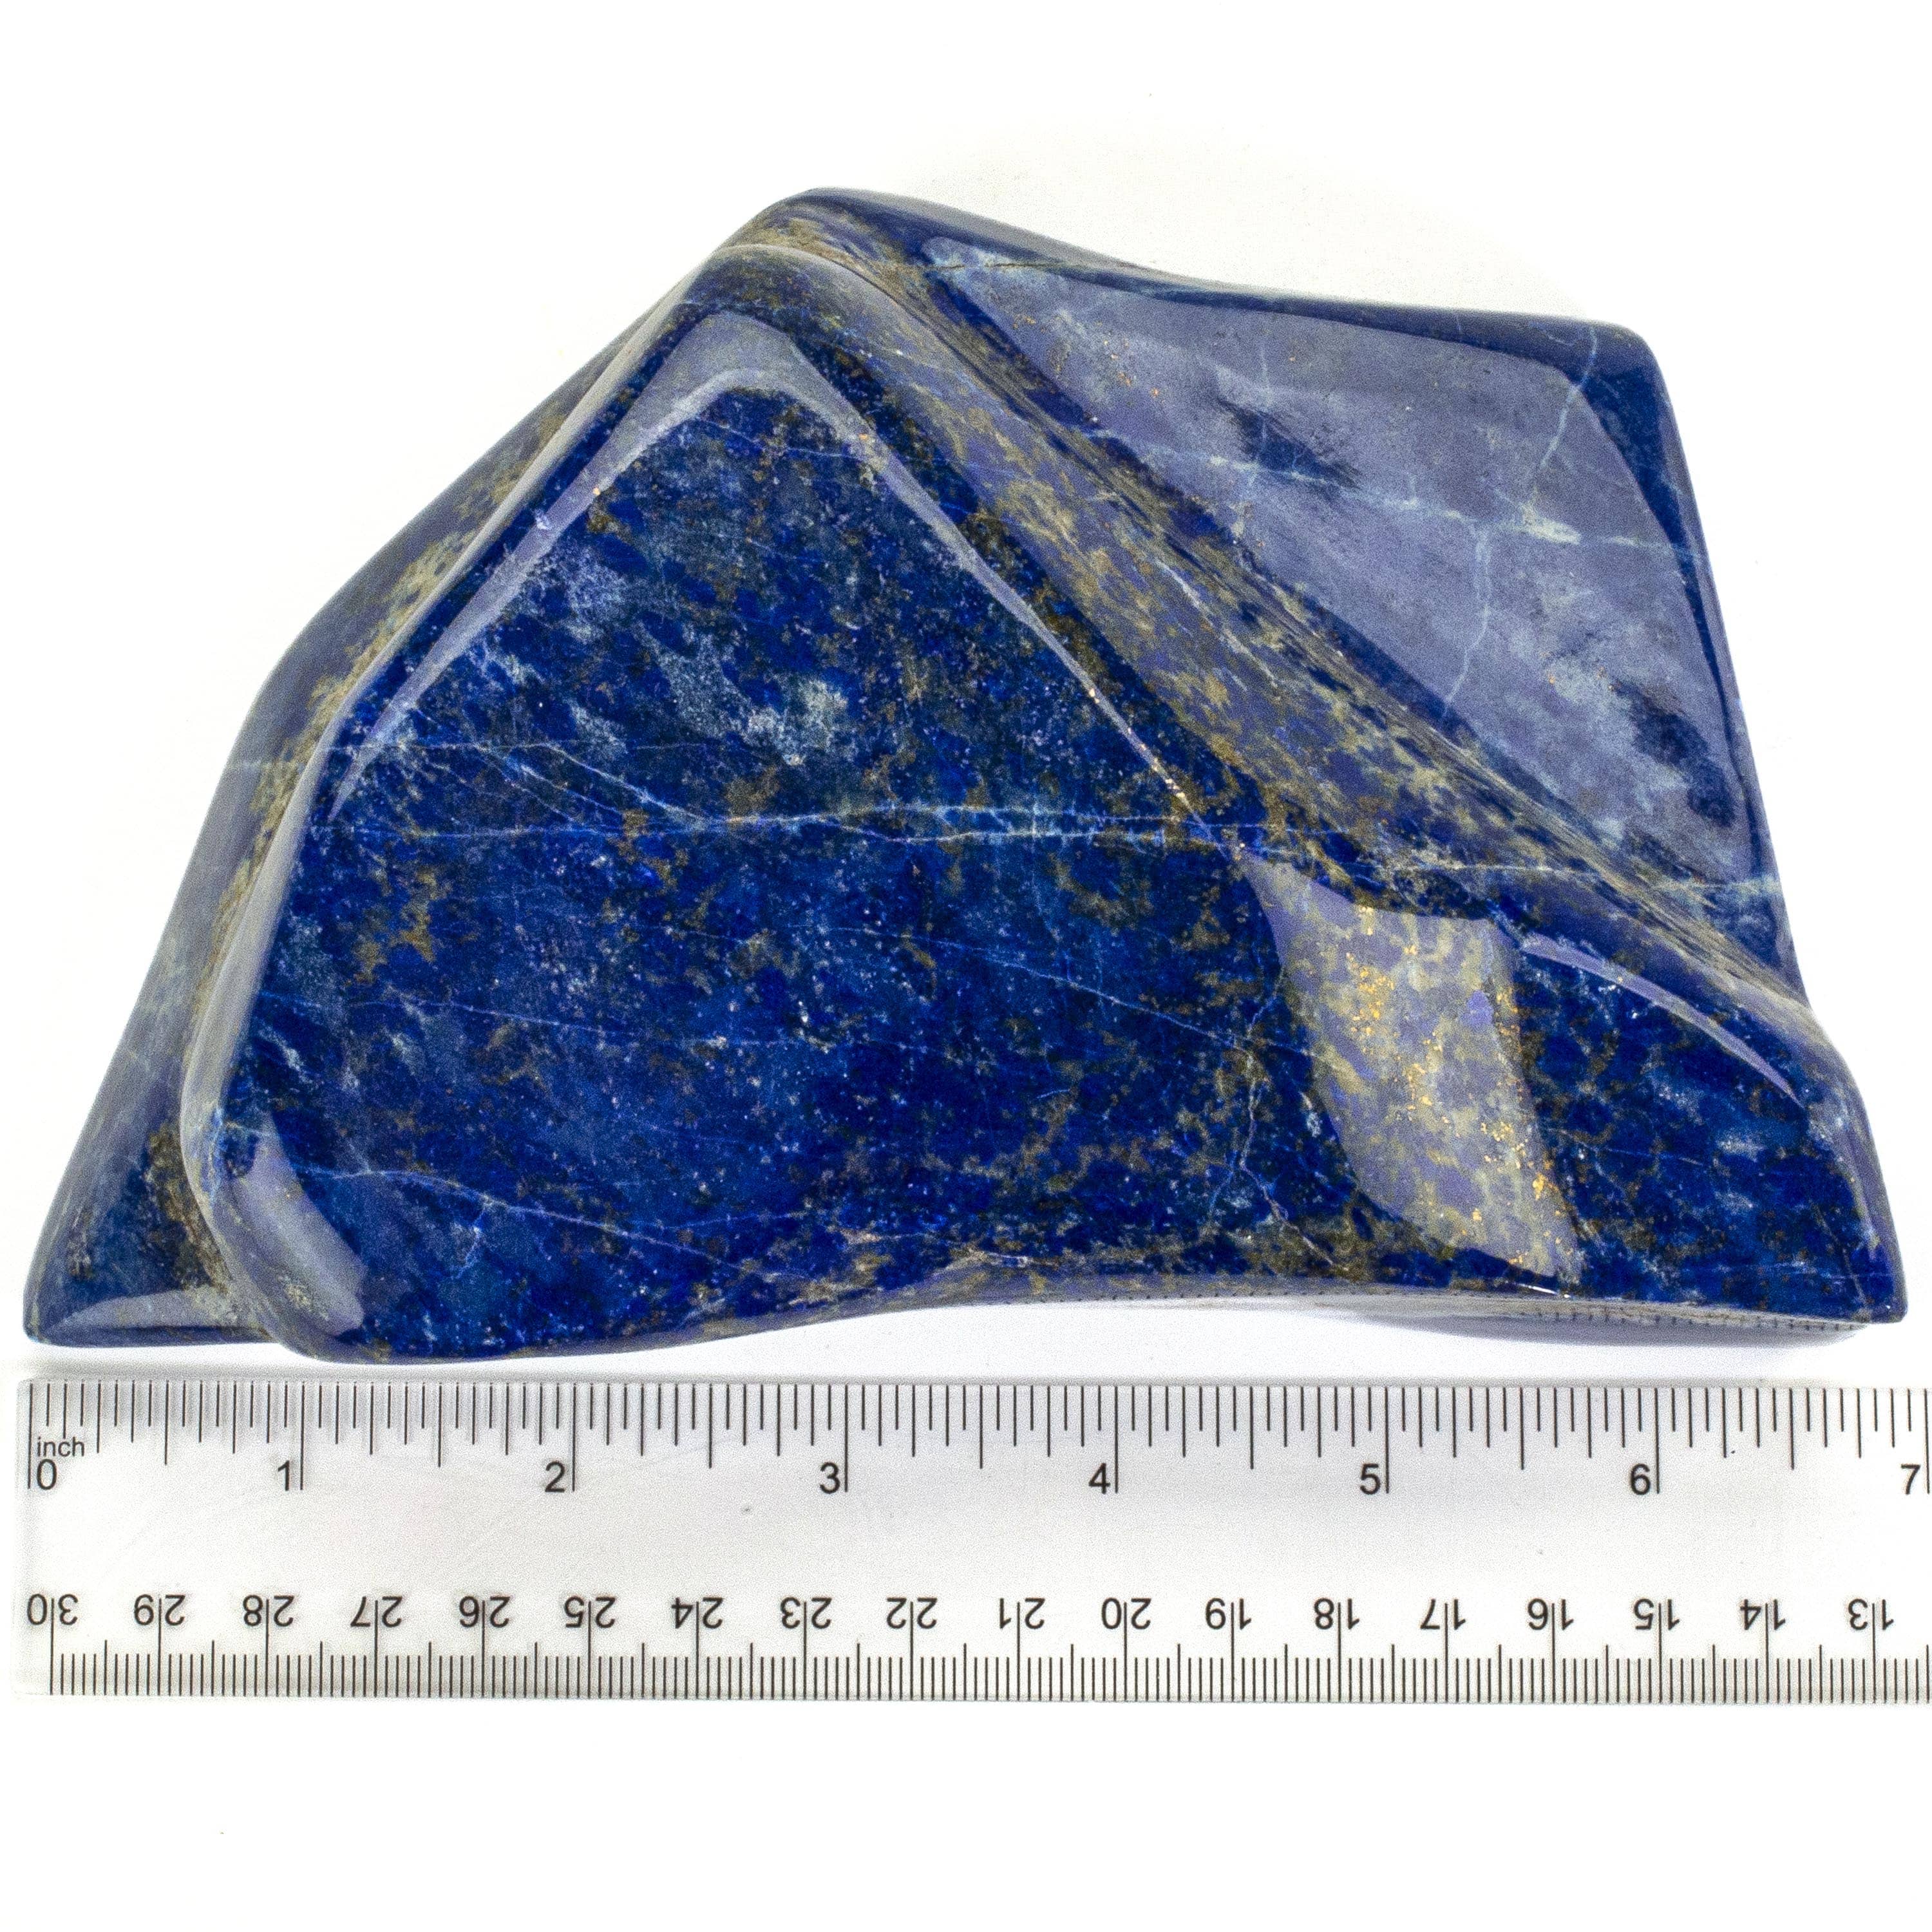 Kalifano Lapis Lapis Lazuil Freeform from Afghanistan - 1.7 kg / 3.8 lbs LP1800.001